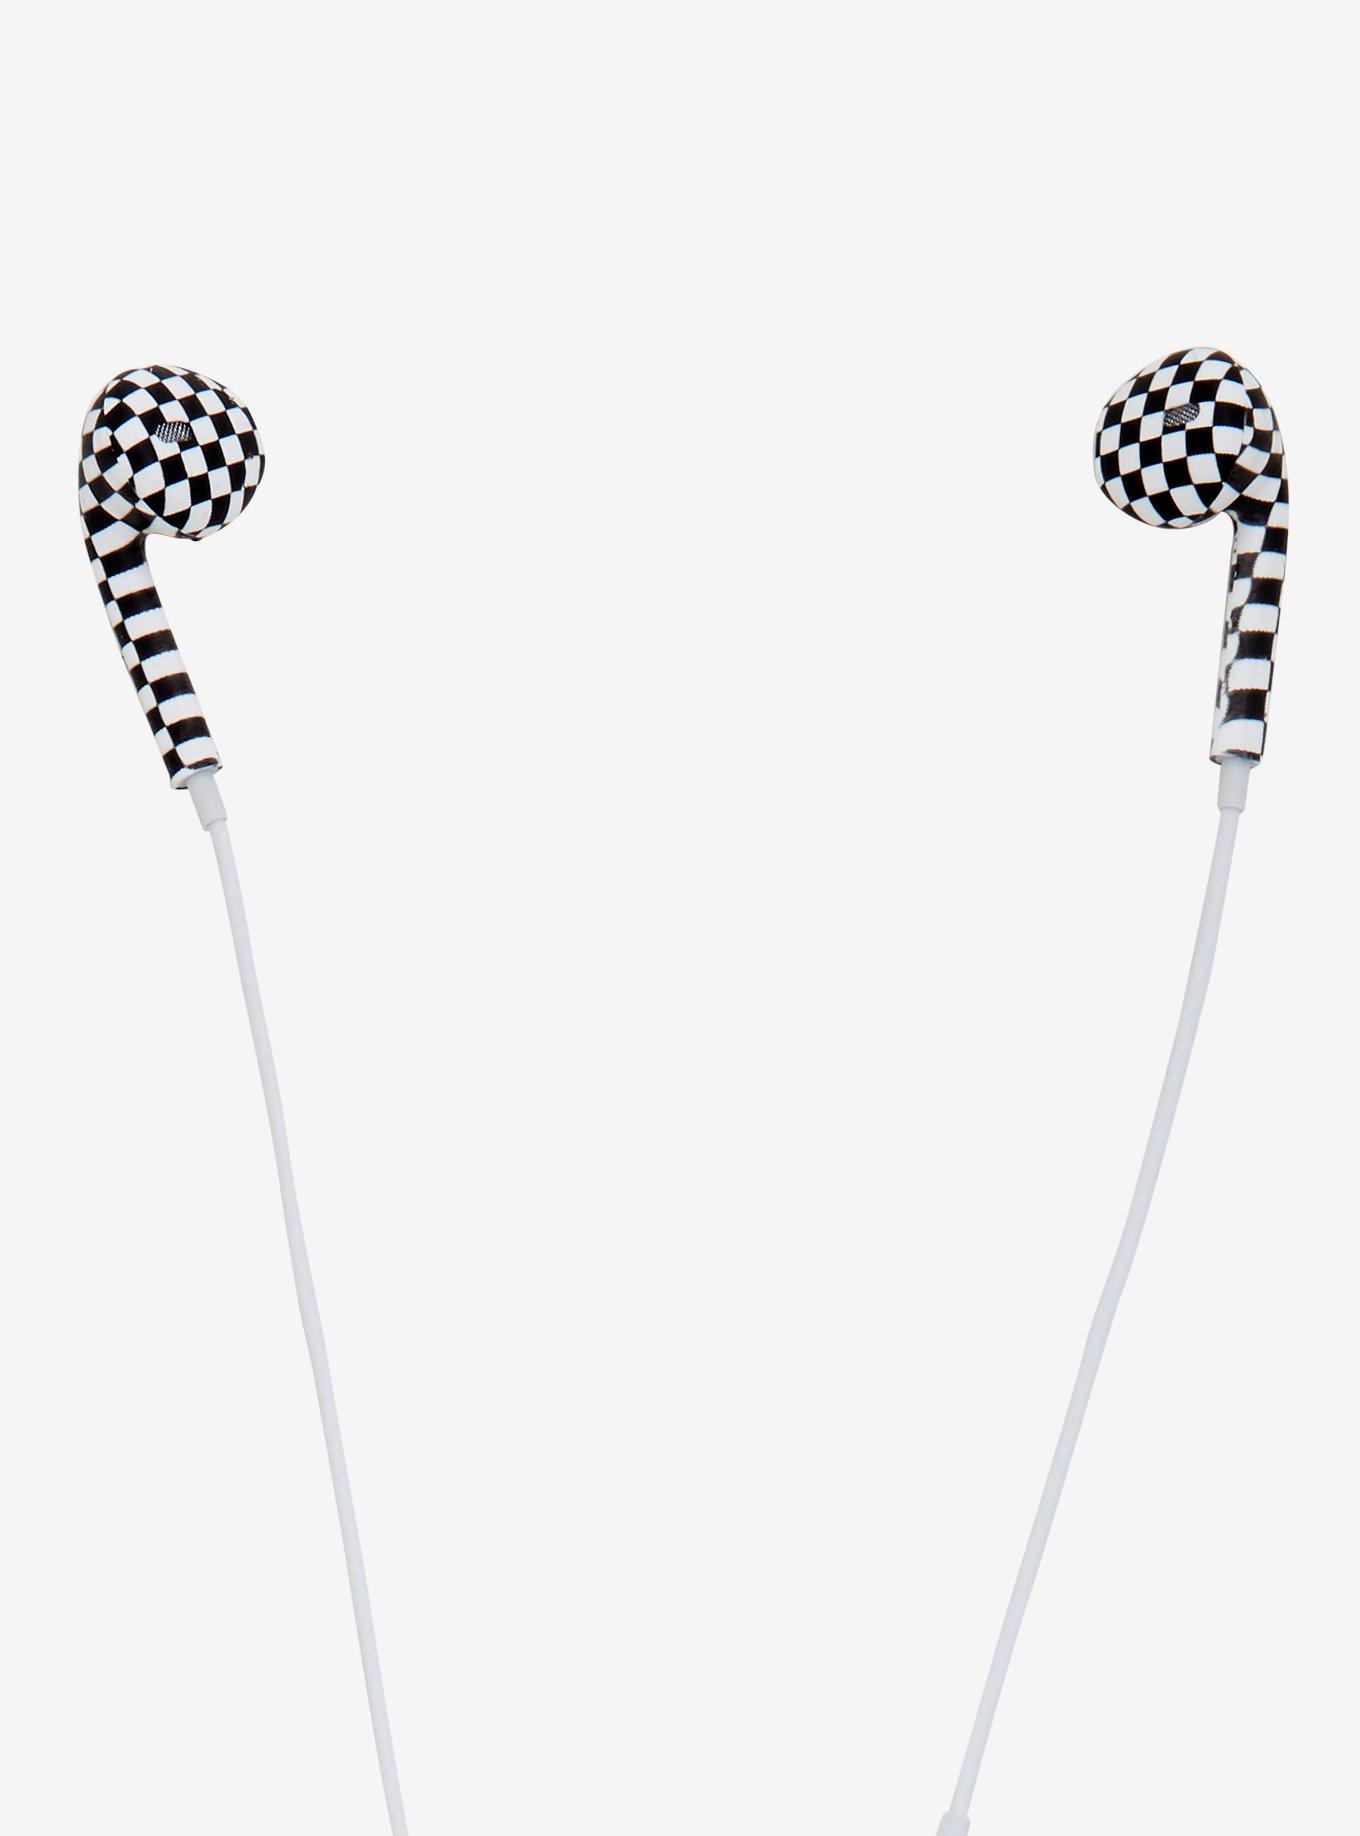 Checkered Black & White Earbuds, , hi-res